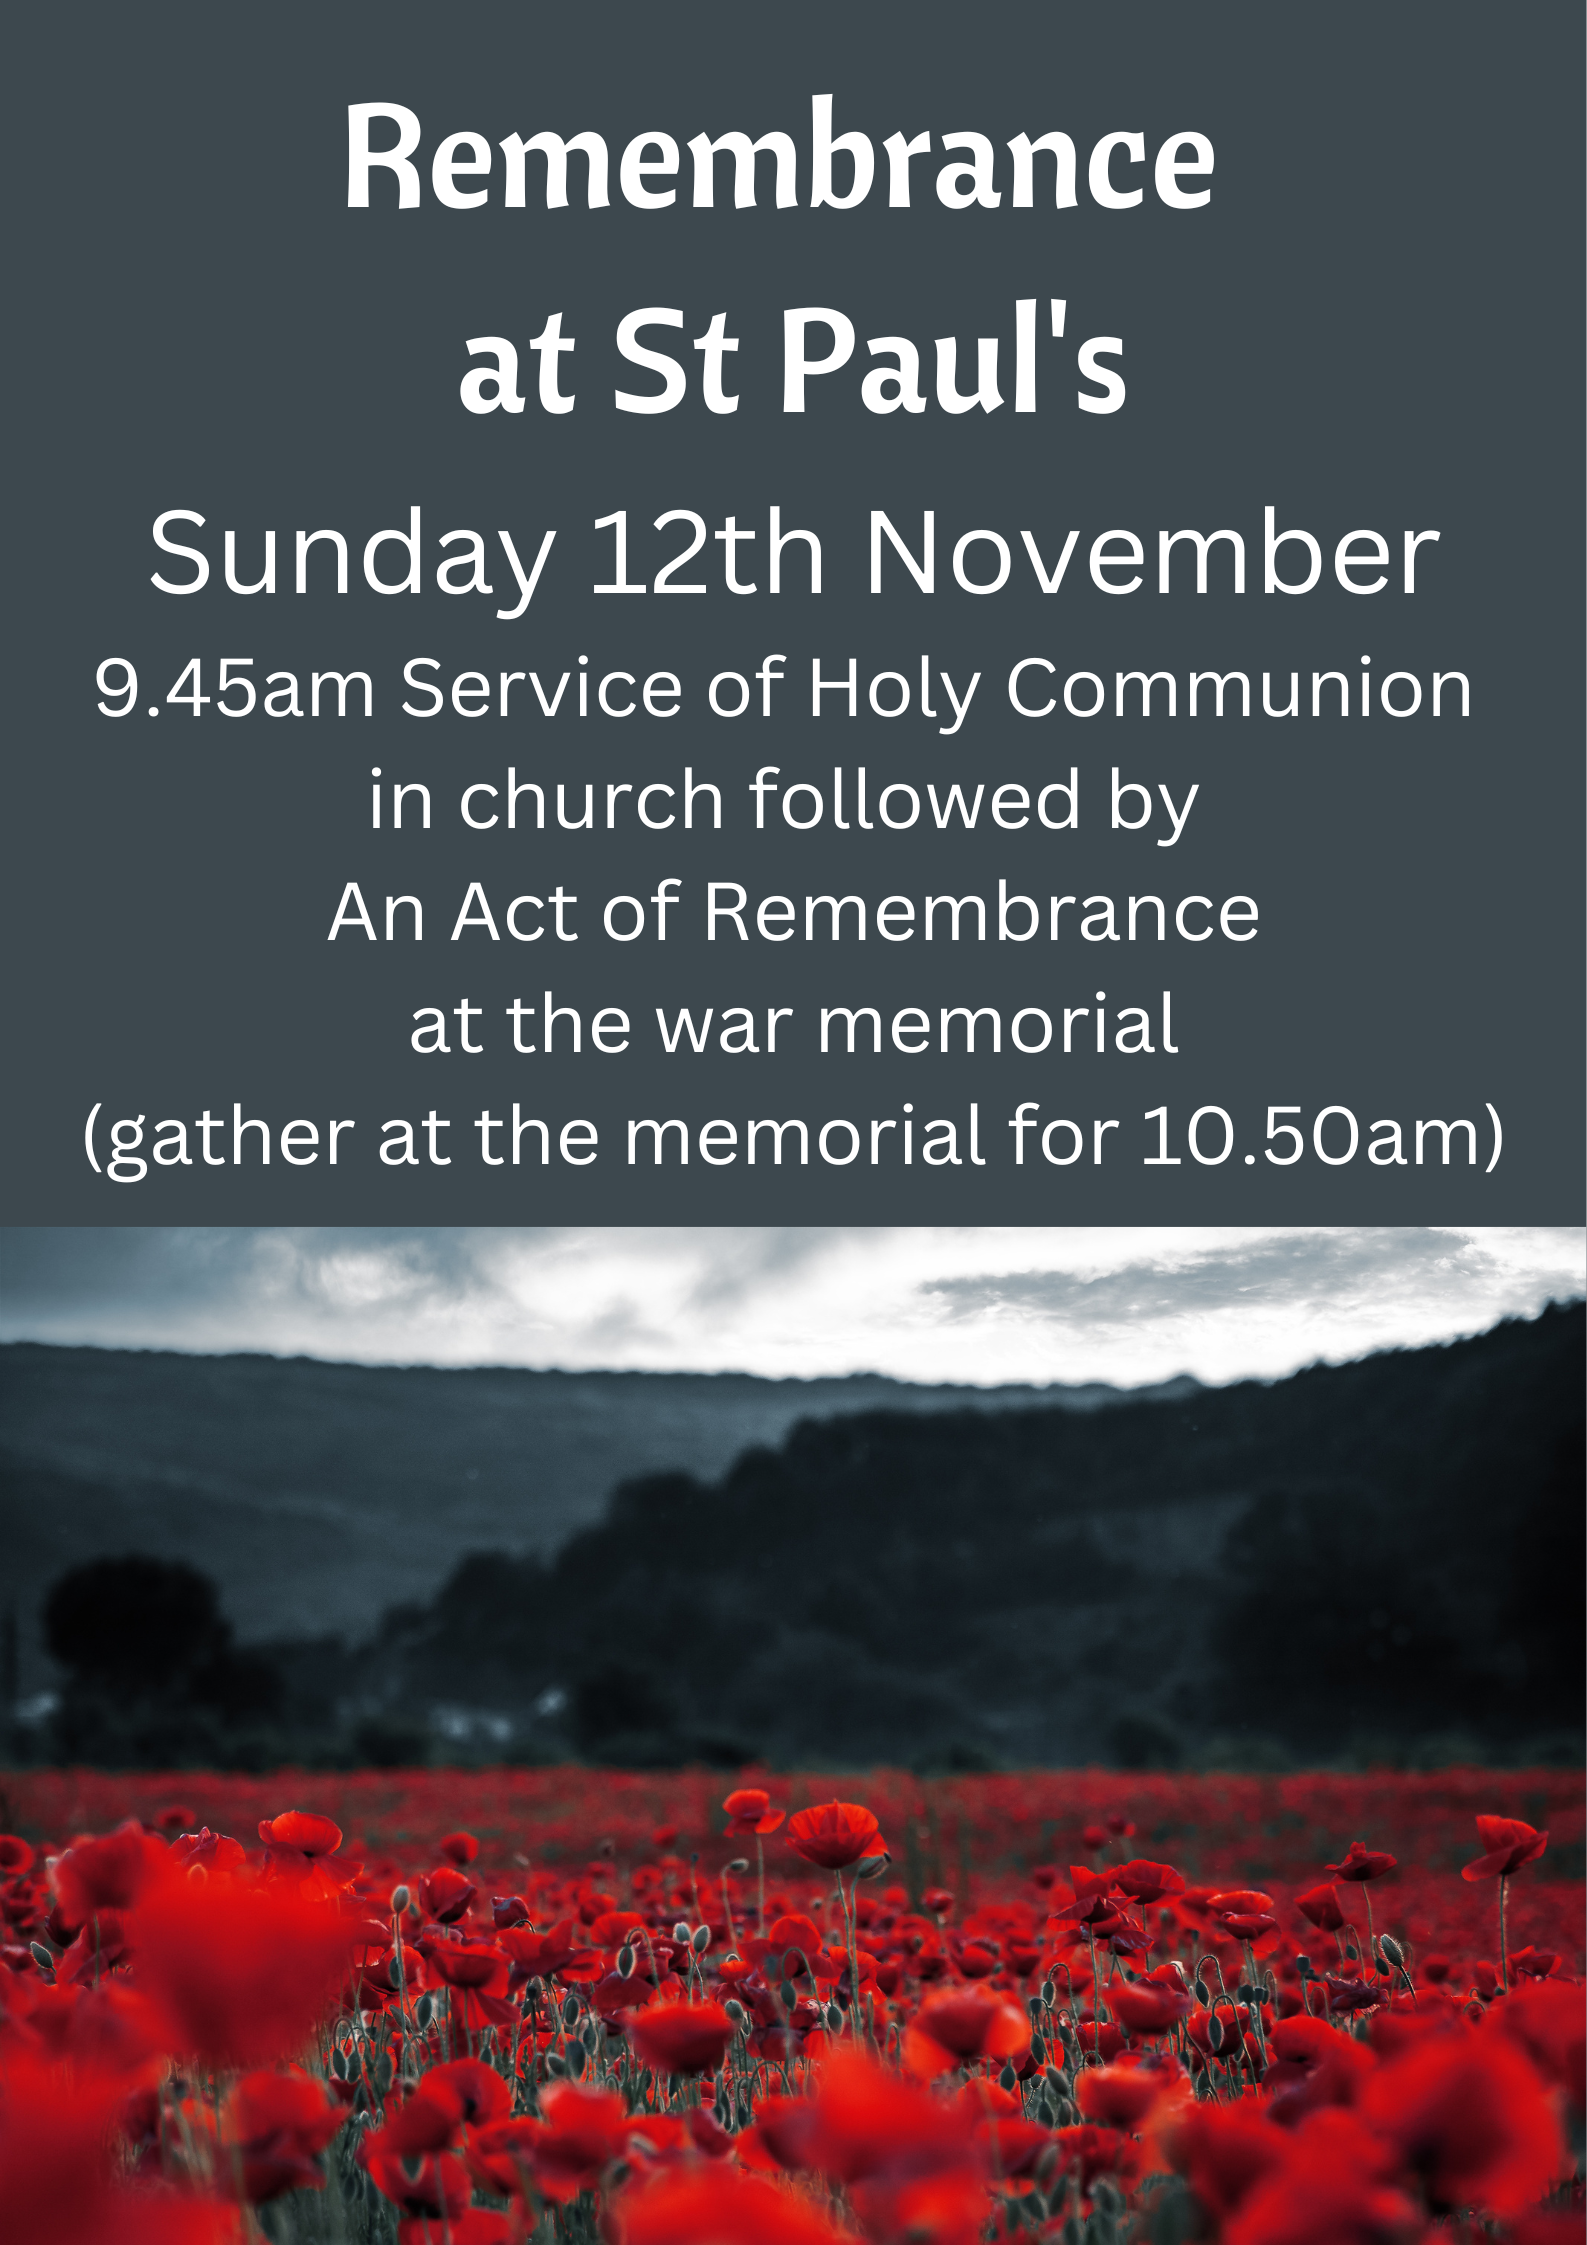 Picture of poppies with the text Remembrance at St Paul's. Sunday 12th November, 9.45am Service of Holy Communion followed by an Act of Remembrance at the war memorial